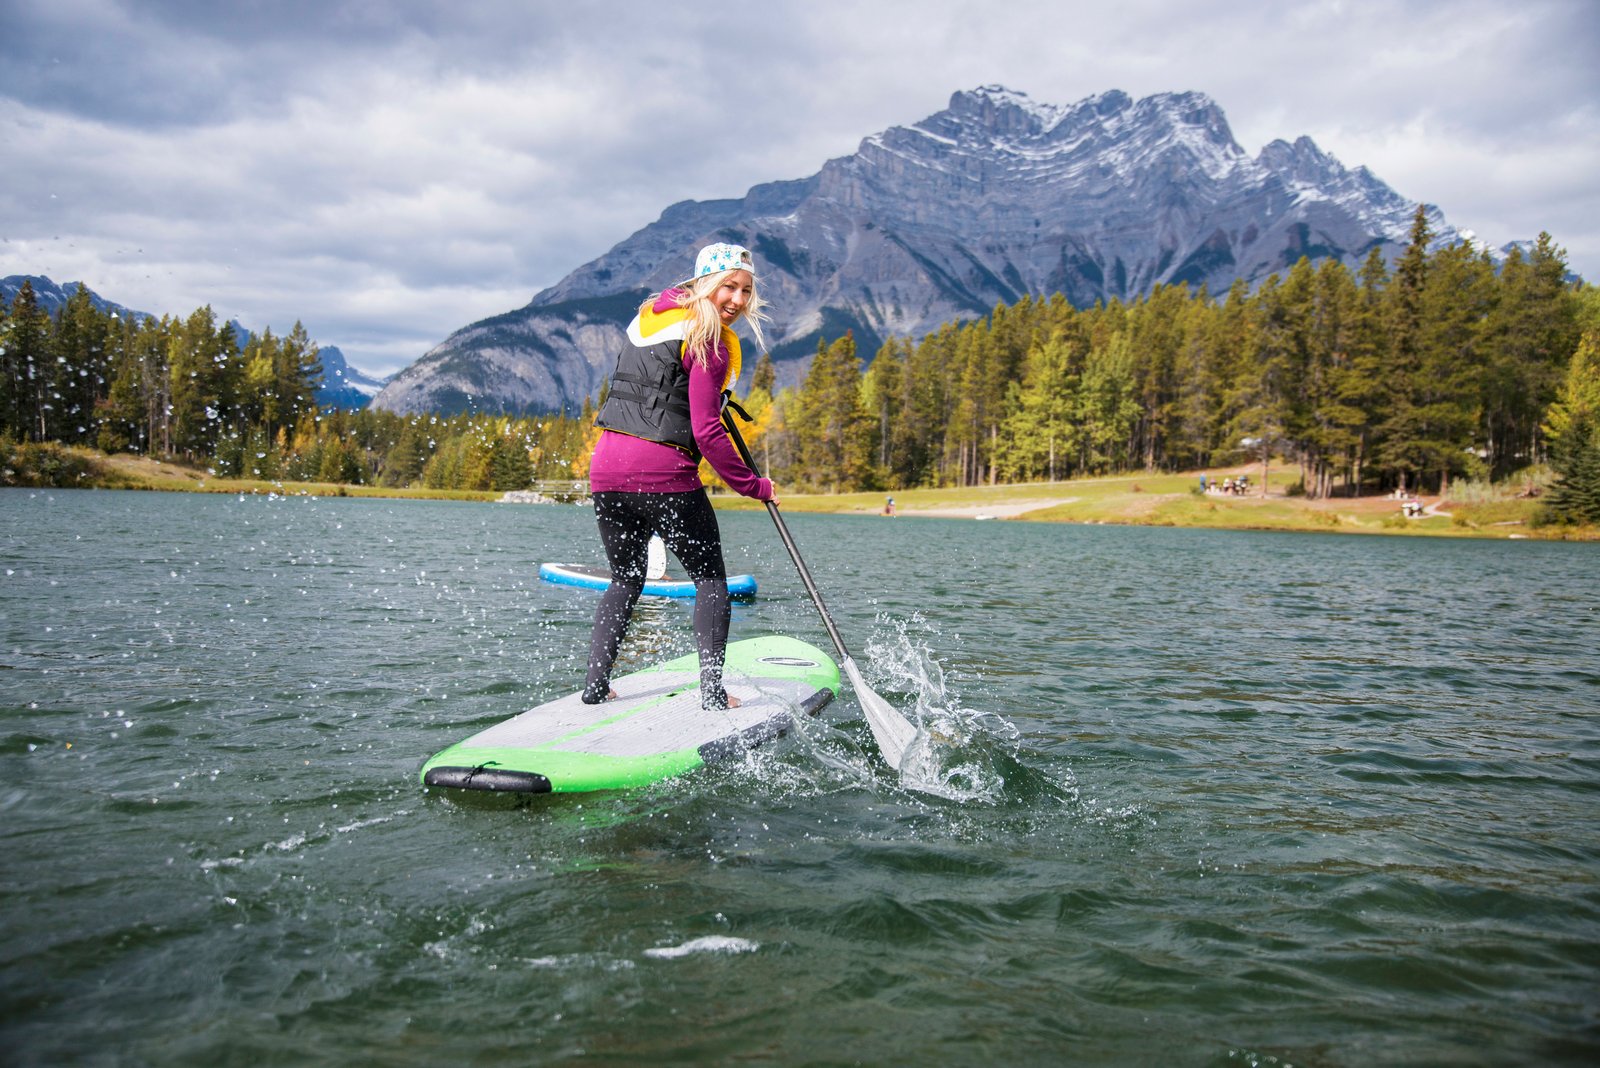 Stand up paddle boarding on Johnson Lake with views of the mountains in Banff National Park.